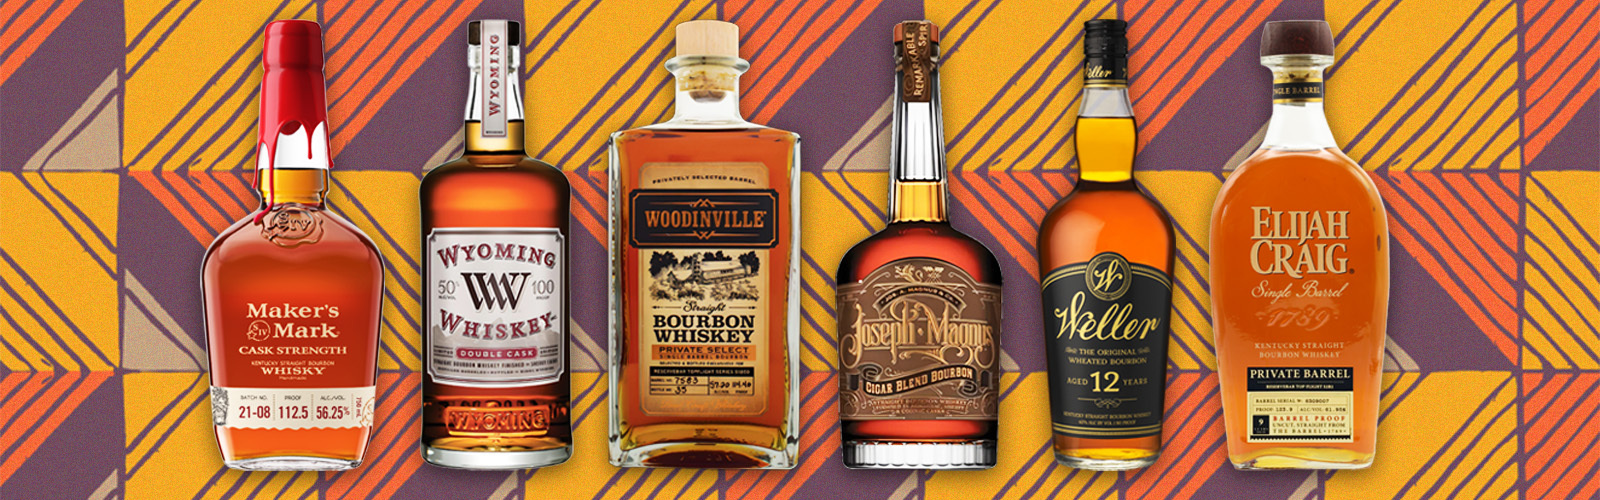 Father's Day Bourbons